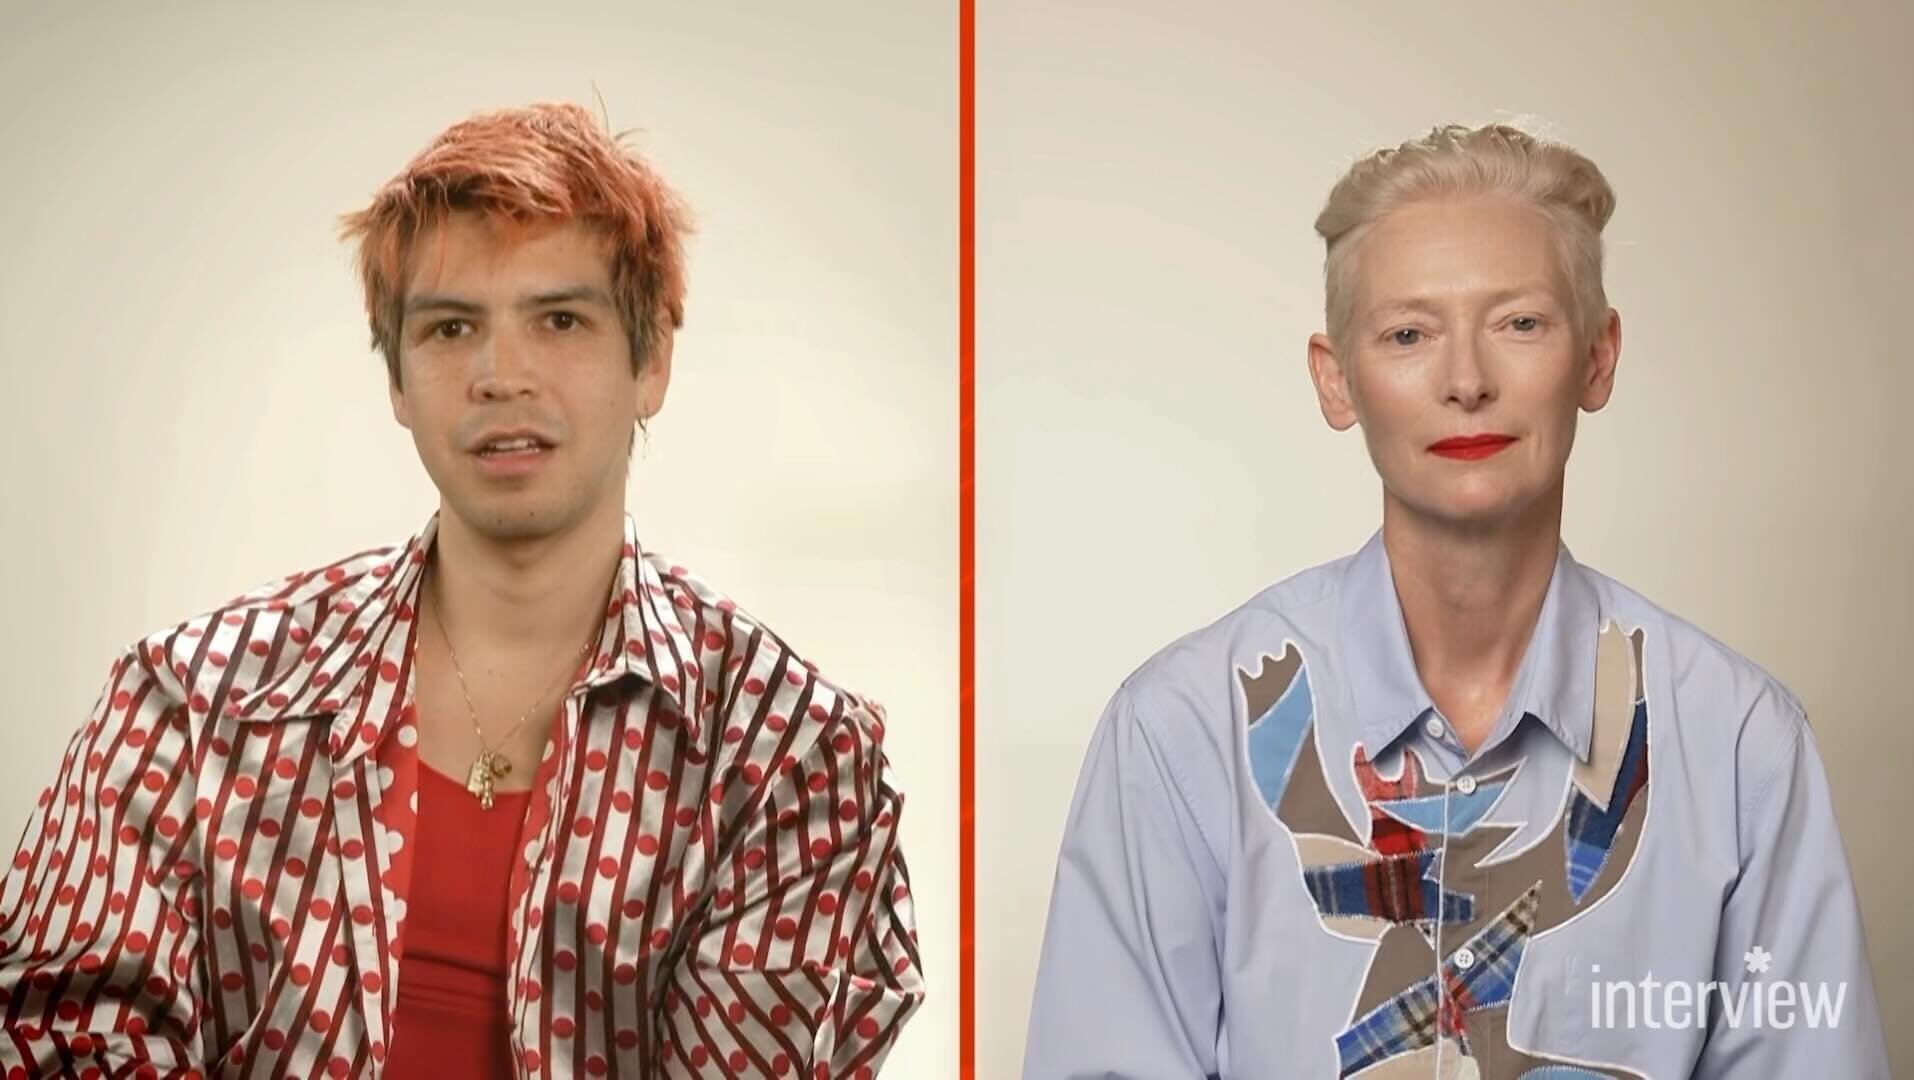 I absolutely adore Julio Torres&rsquo; @problemista, and not JUST because it allowed me the opportunity to Zoom with Julio and the legendary Tilda Swinton. (It&rsquo;s so brilliant&mdash;go see it!)

Swipe thru for: (1) Tilda describing herself as a 